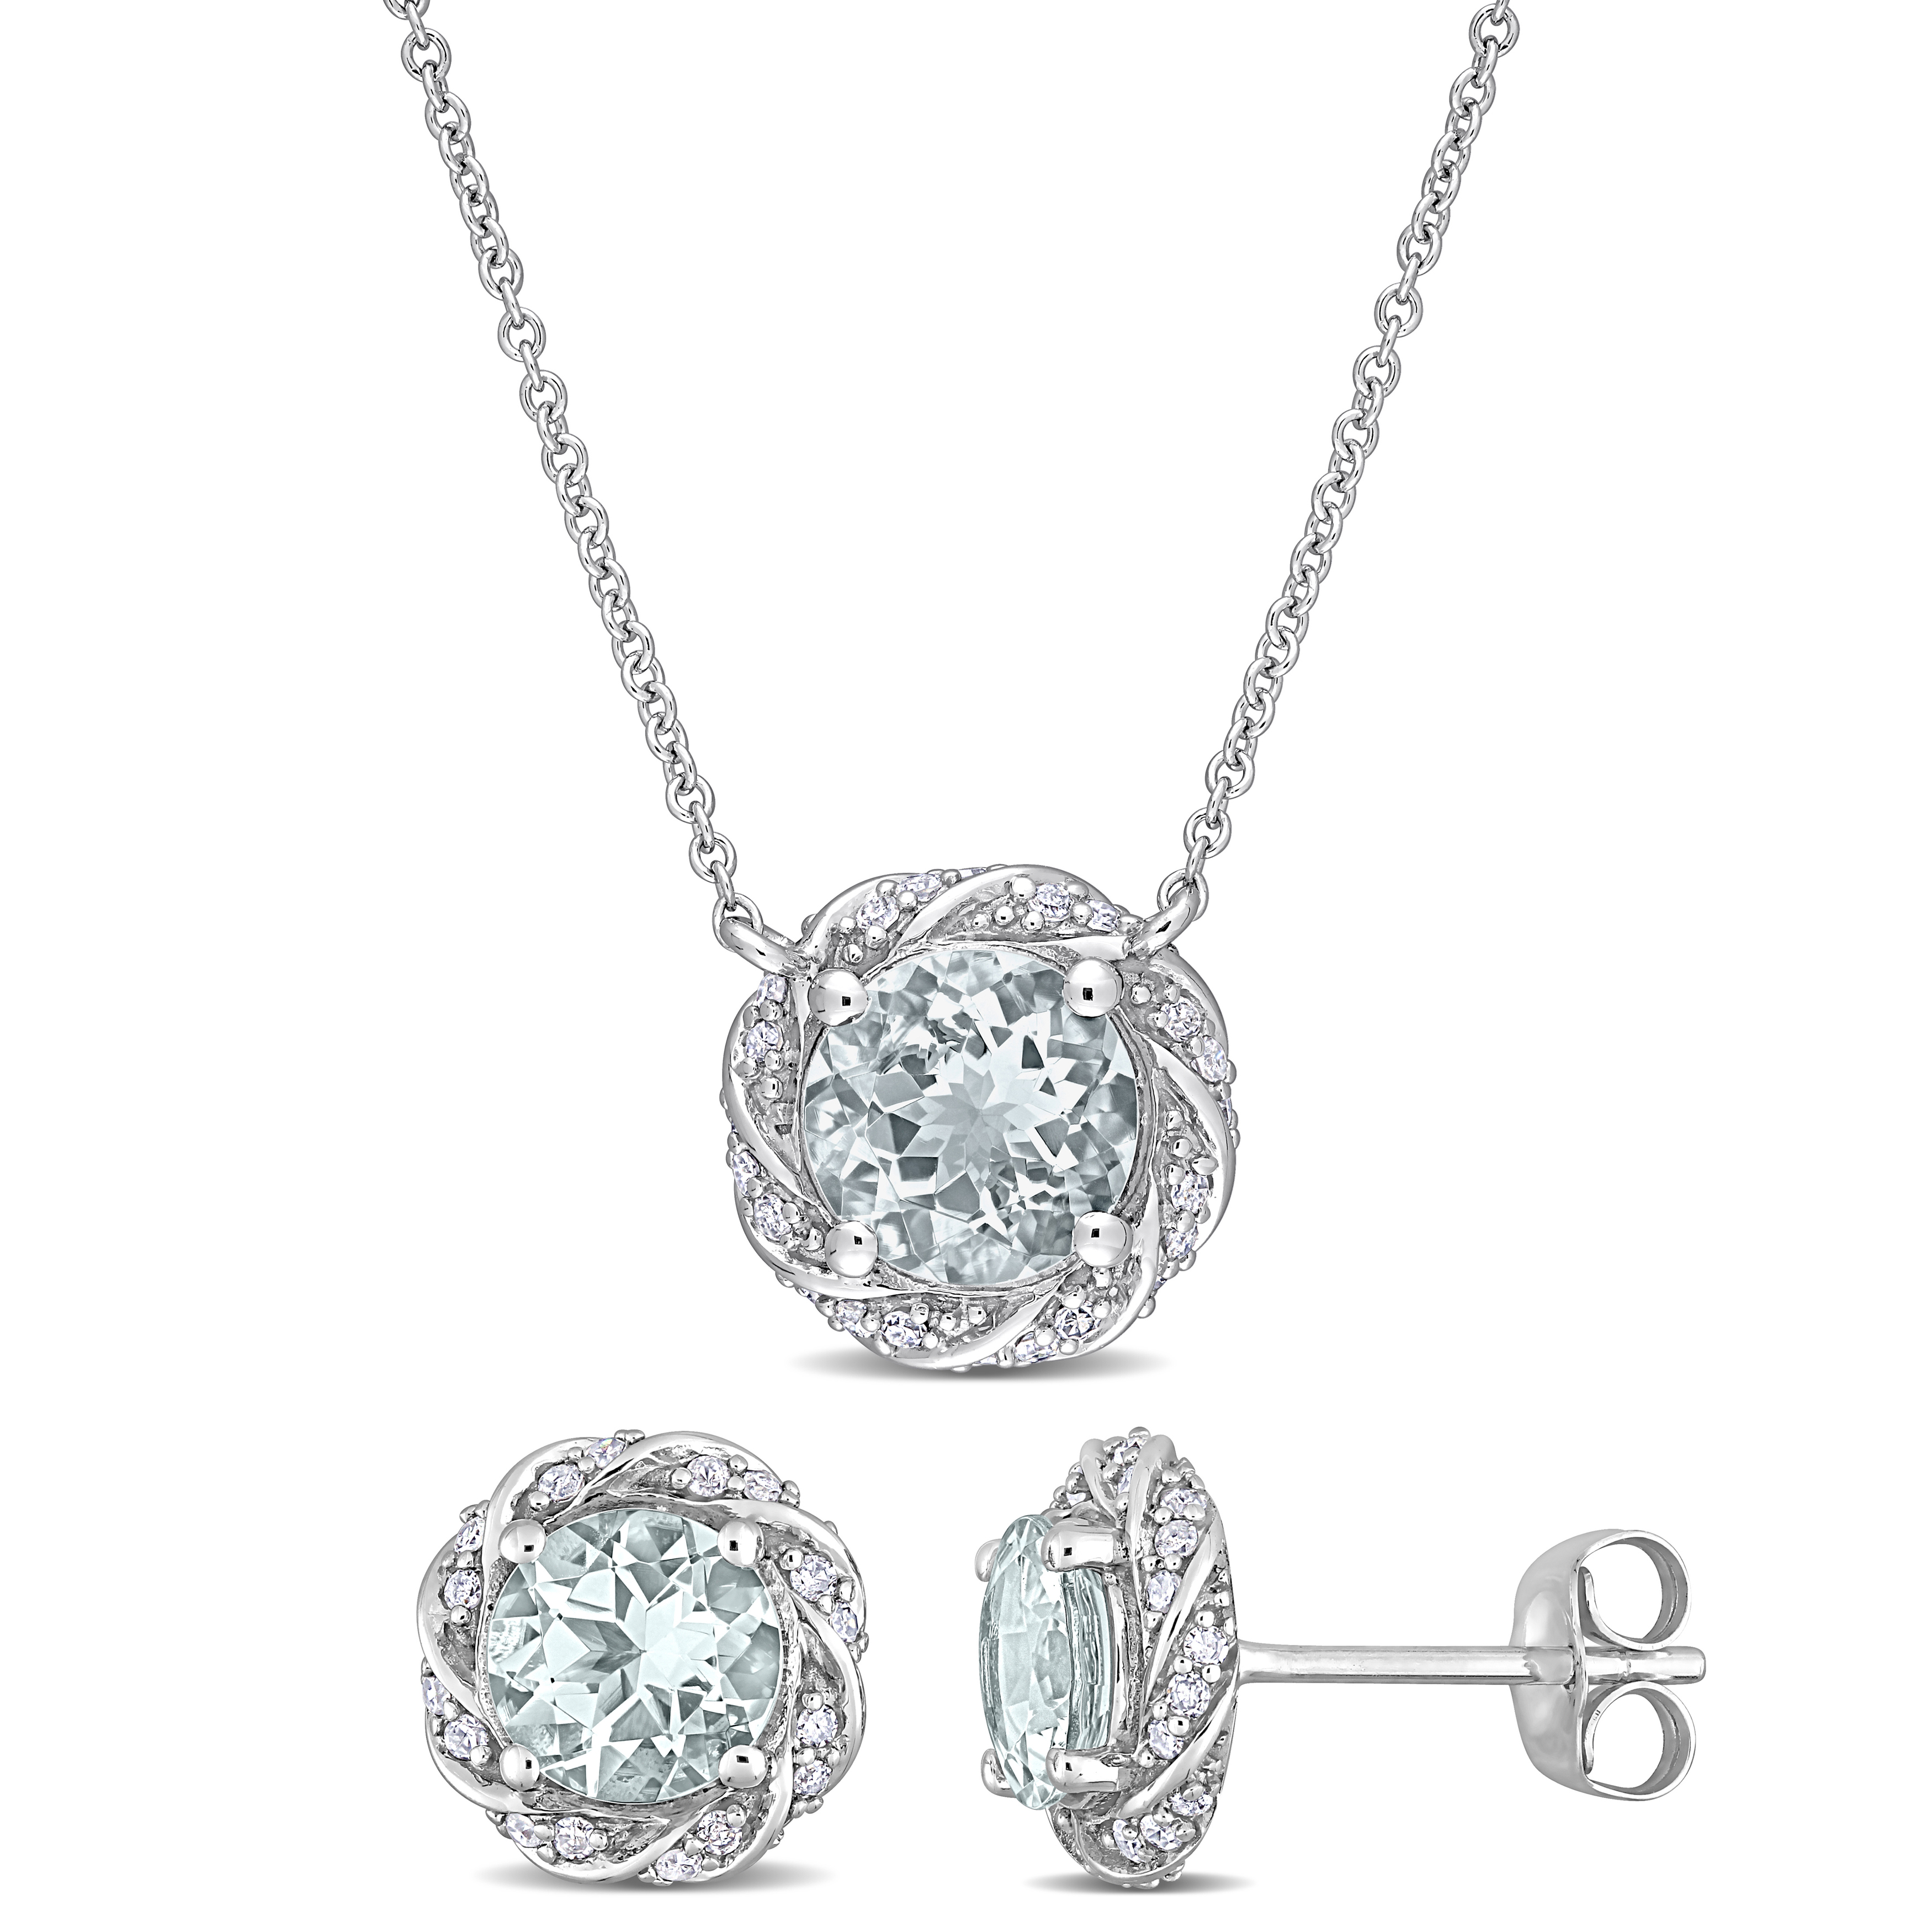 2 1/2 CT TGW Aquamarine and 1/3ct Diamond 2-Piece Halo Necklace and Earrings Set in 10k White Gold